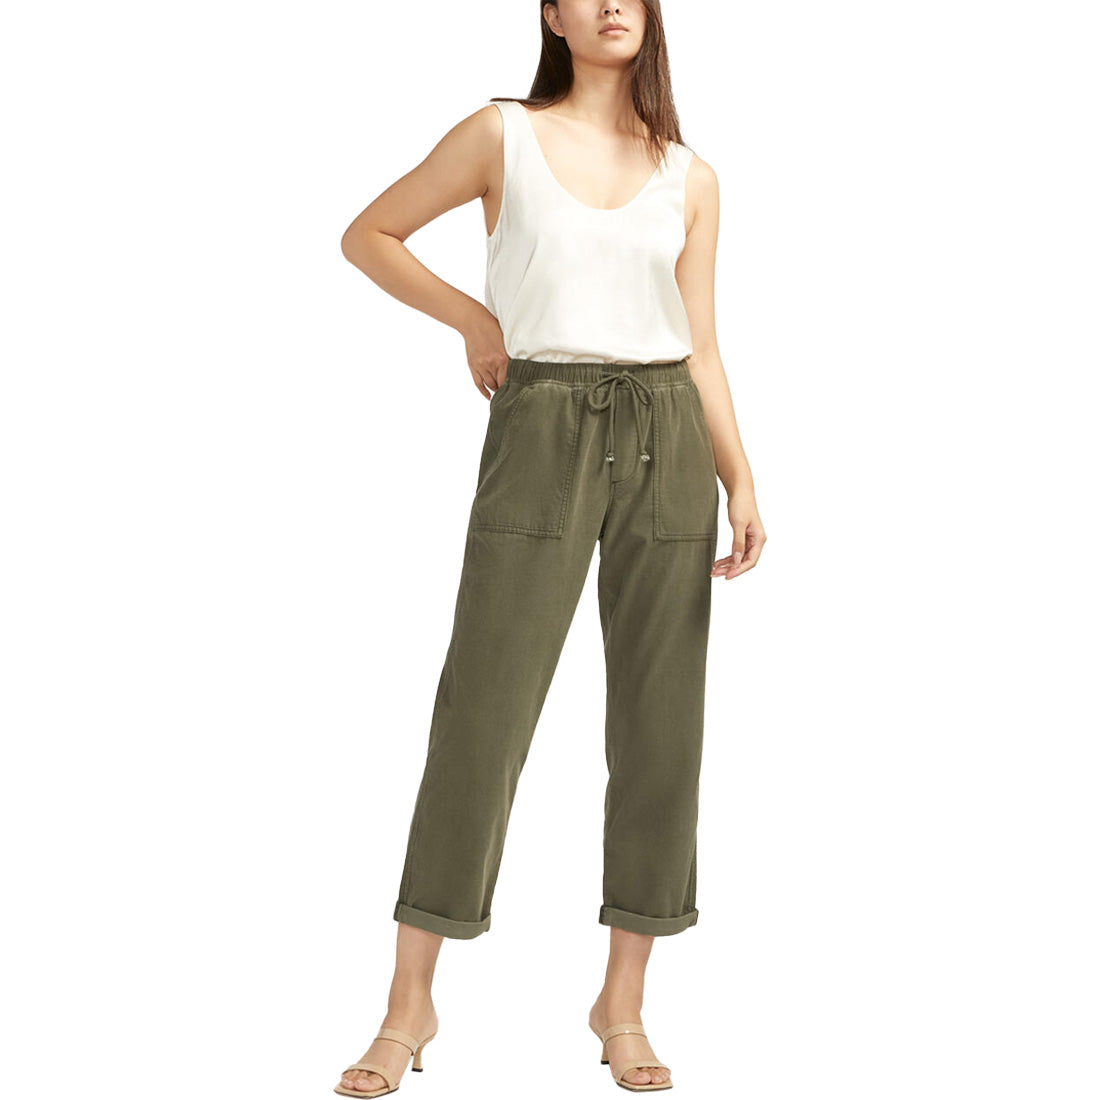 JAG Jean Relaxed Drawstring Pant - Women's